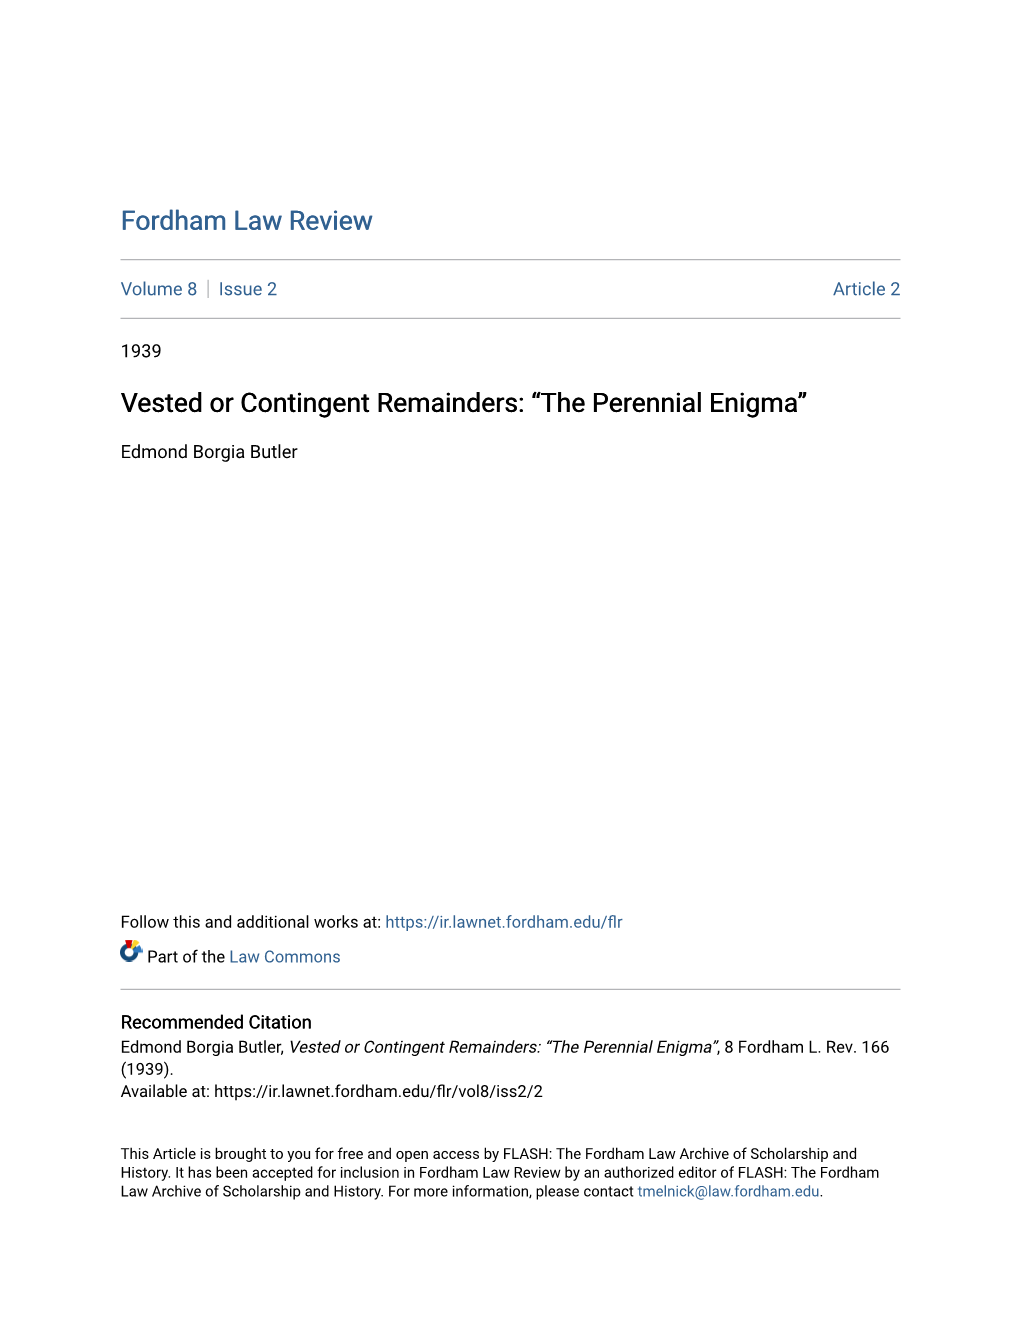 Vested Or Contingent Remainders: “The Perennial Enigma”